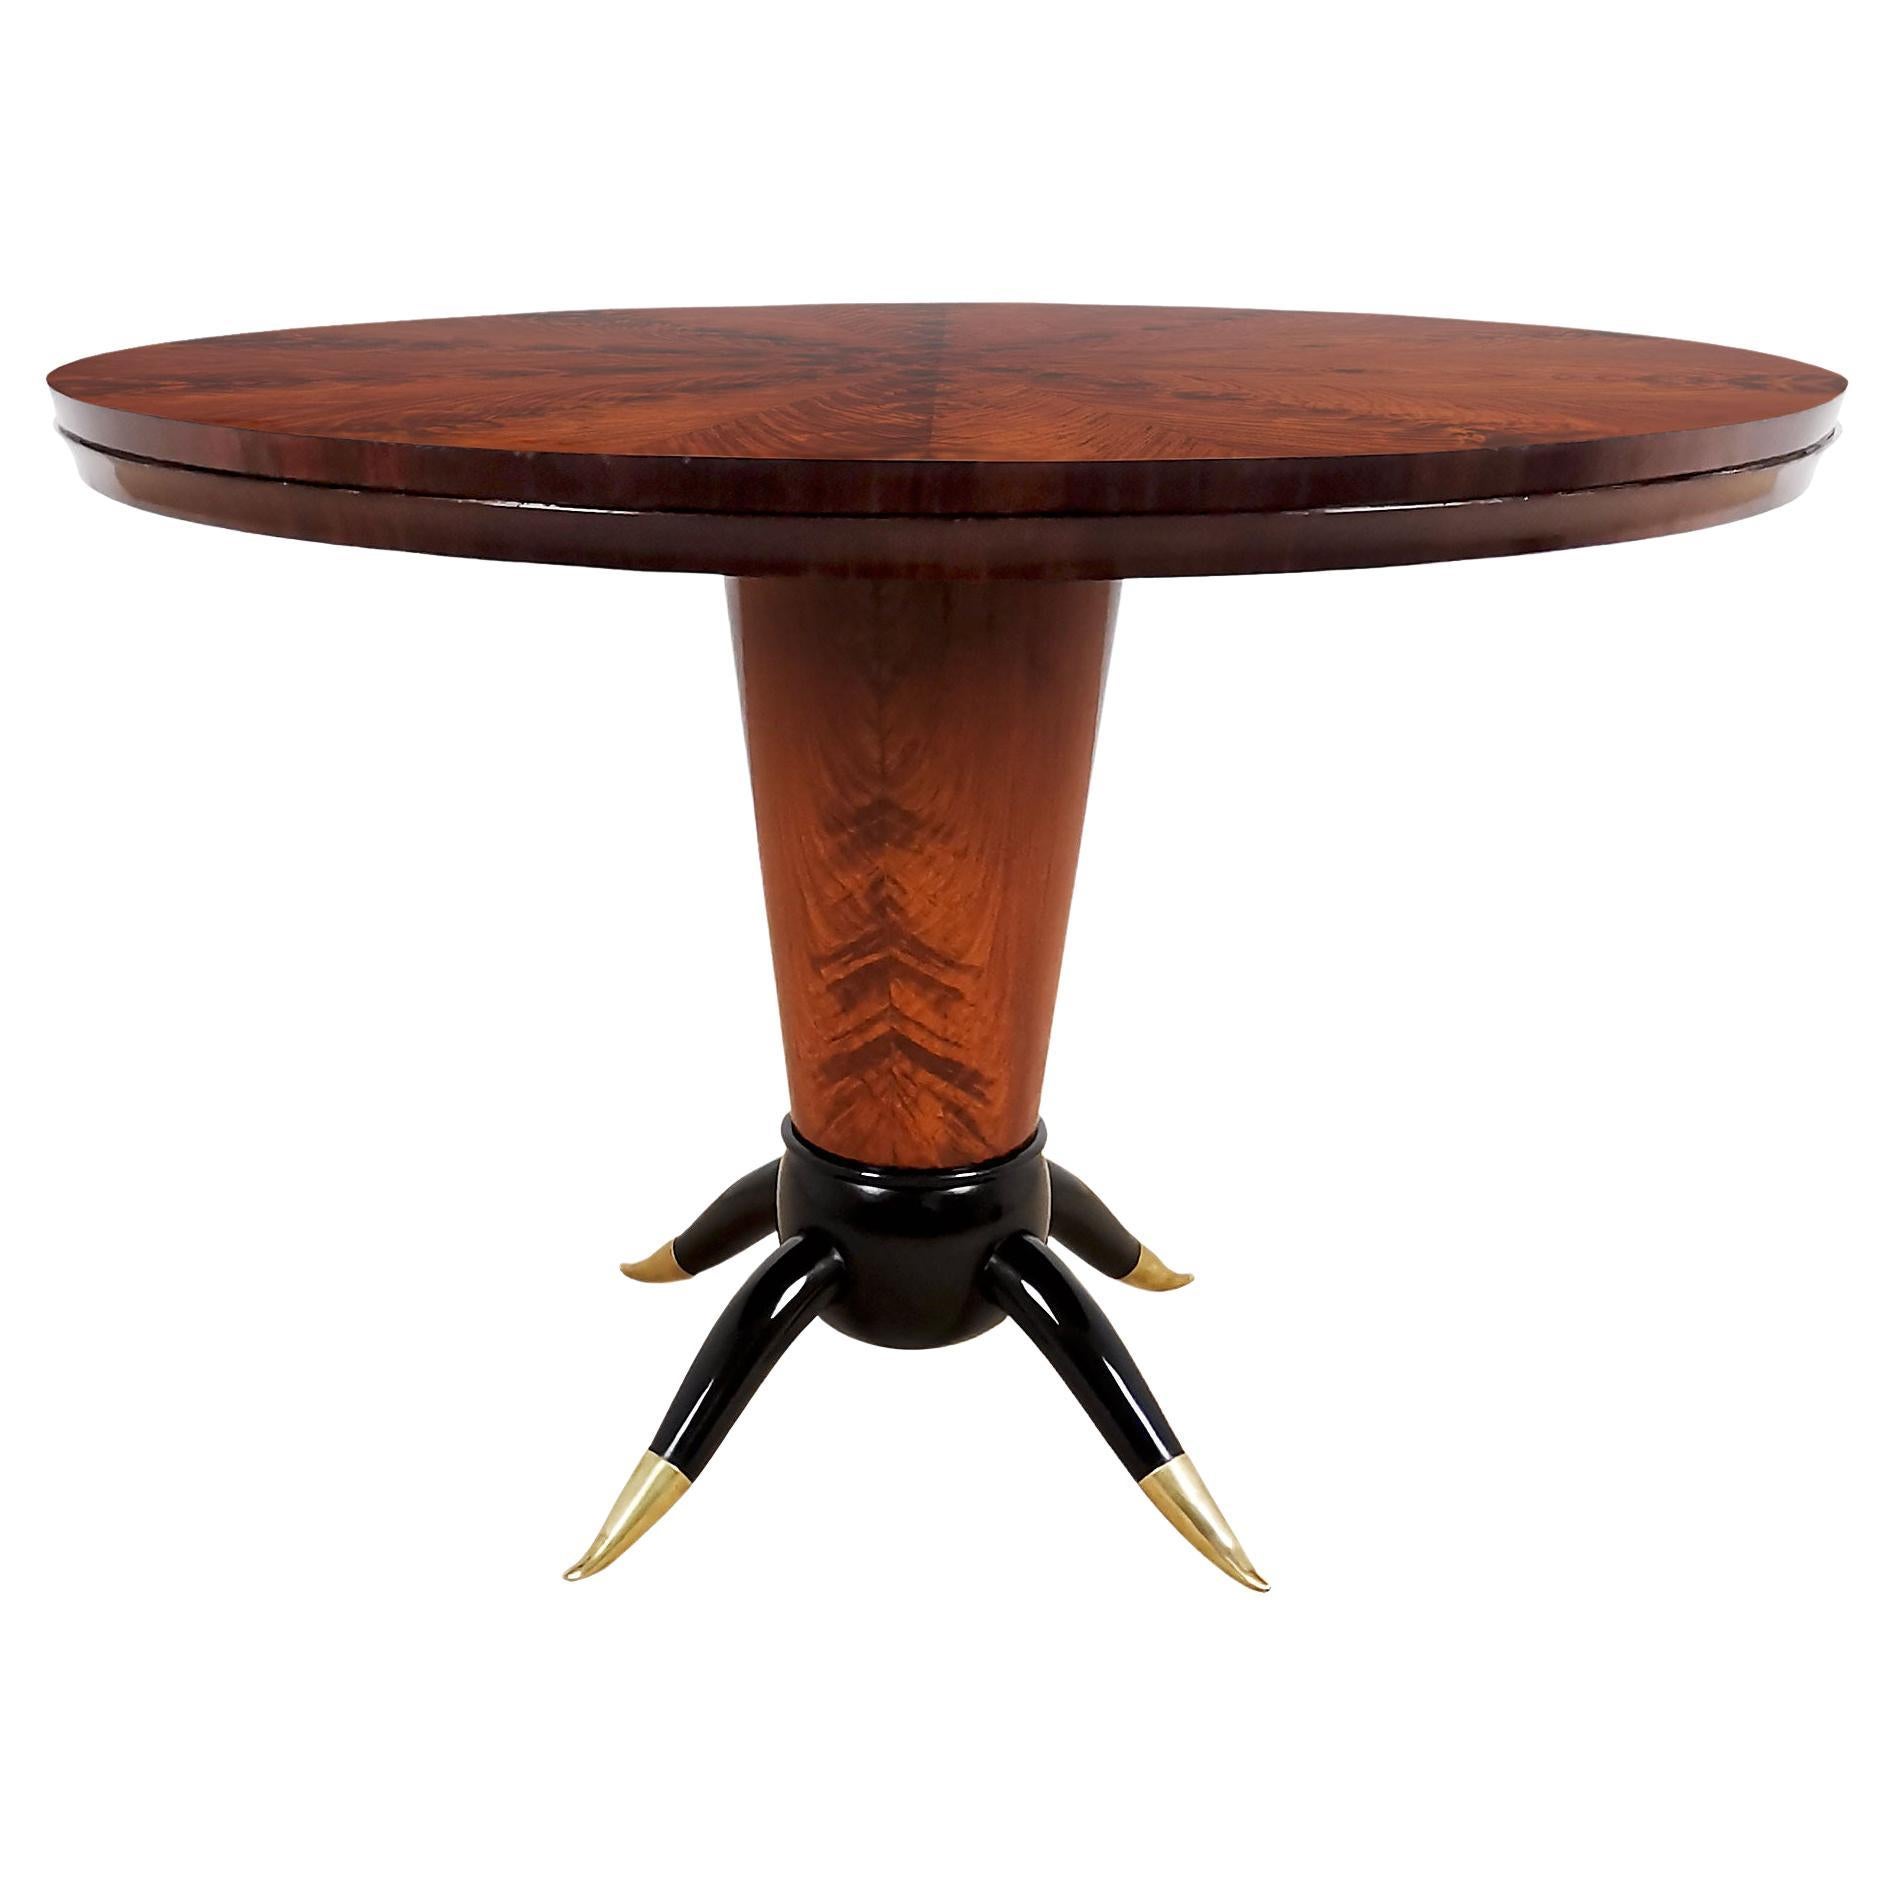  Mid-Century Modern Center Table in Solid Wood and brass feet - Italy 1940 For Sale